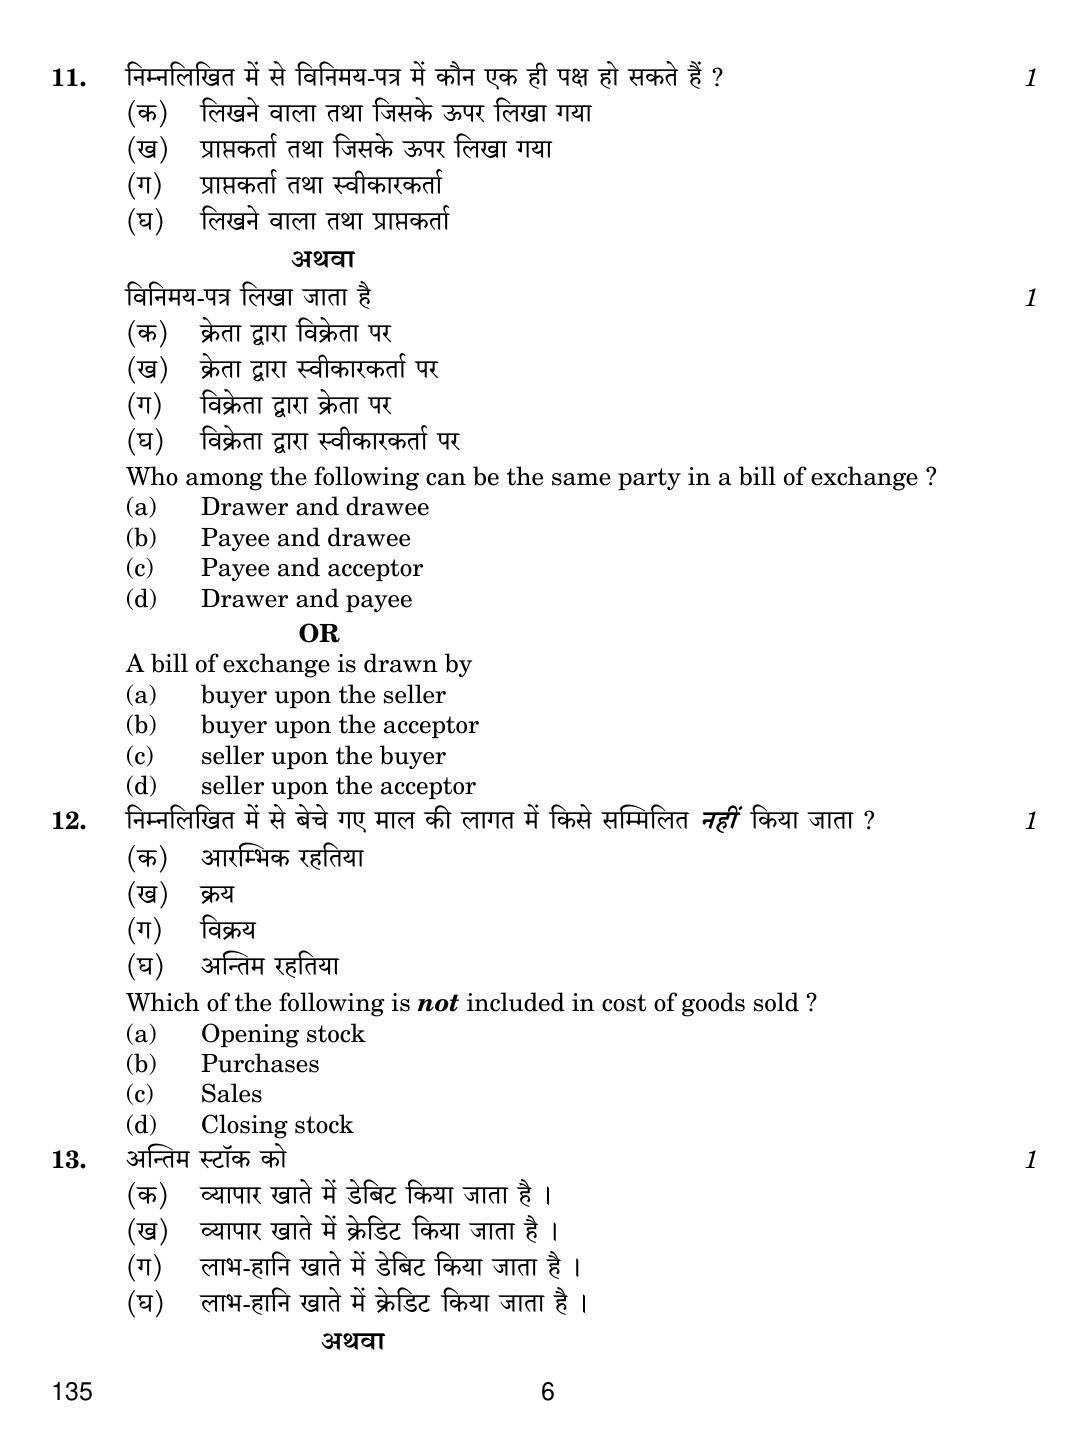 CBSE Class 10 135 ELEMENTS OF BOOK-KEEPING AND ACCOUNTANCY (COMMERCE) 2019 Question Paper - Page 6